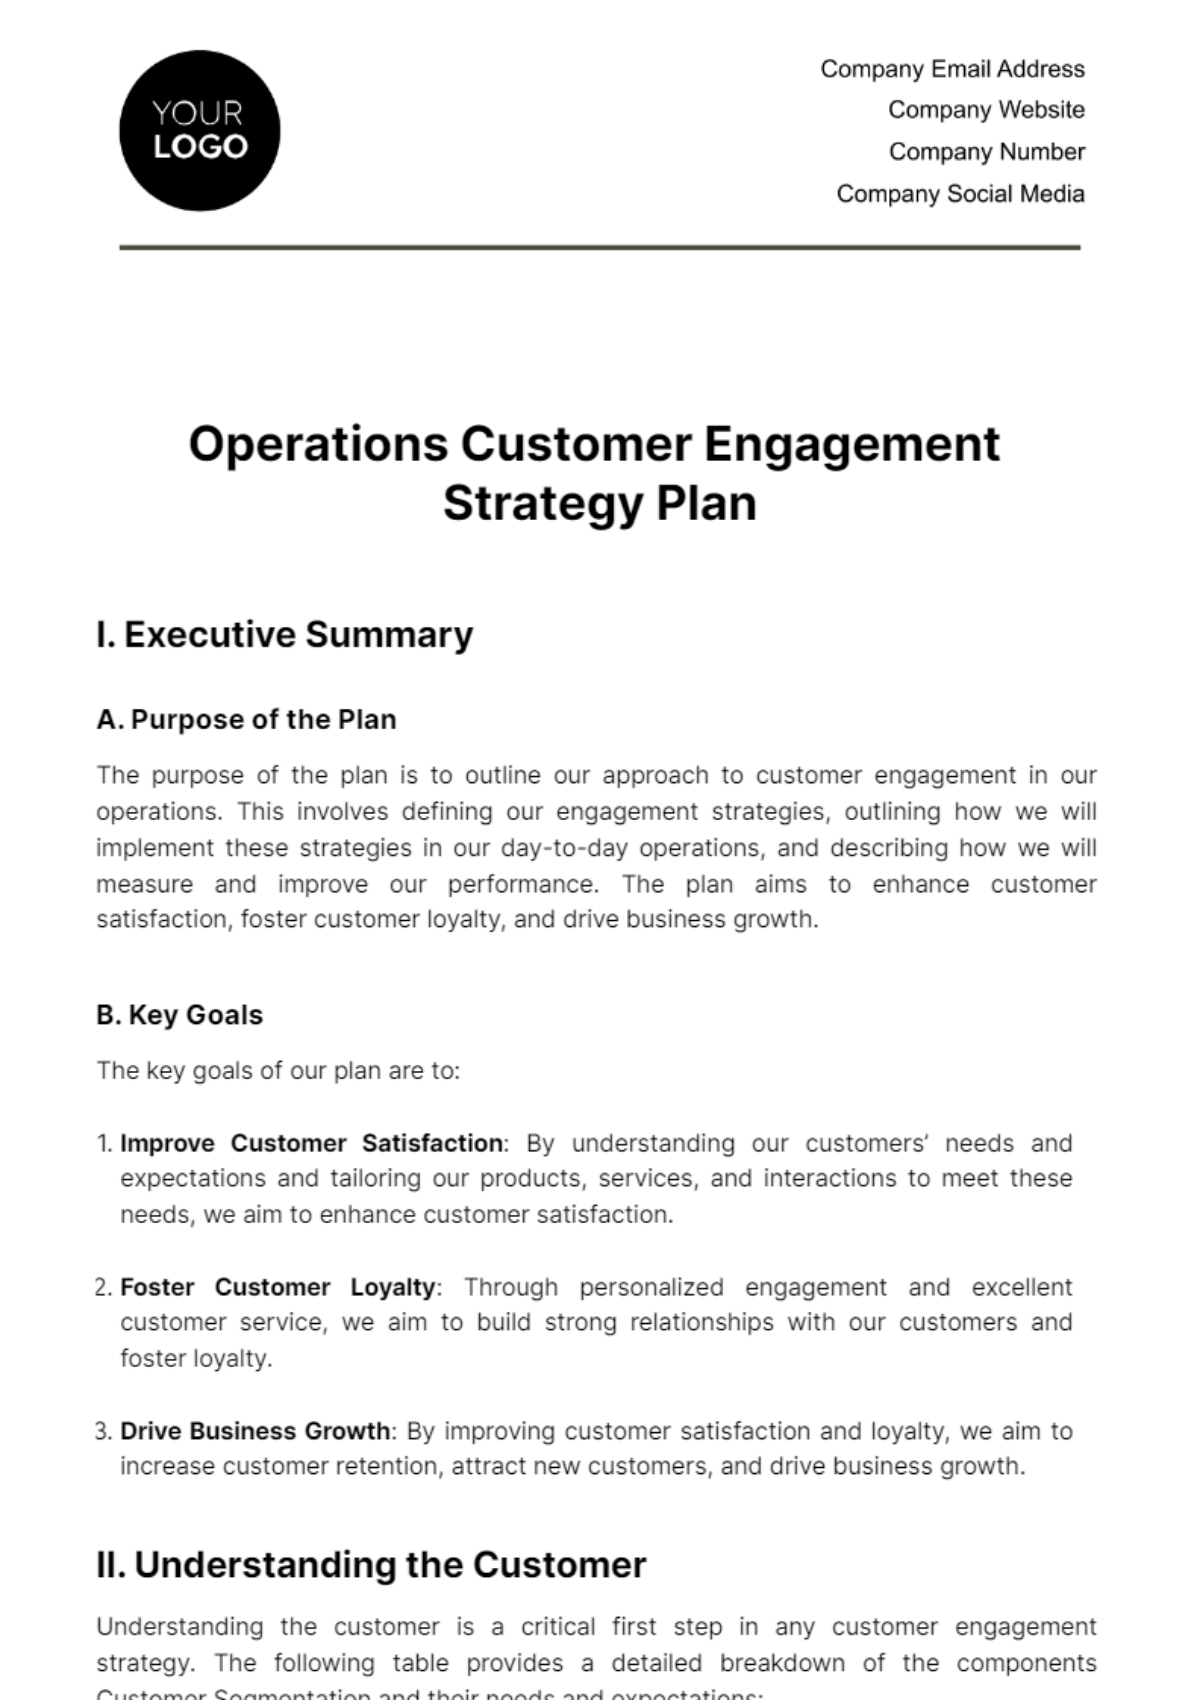 Operations Customer Engagement Strategy Plan Template